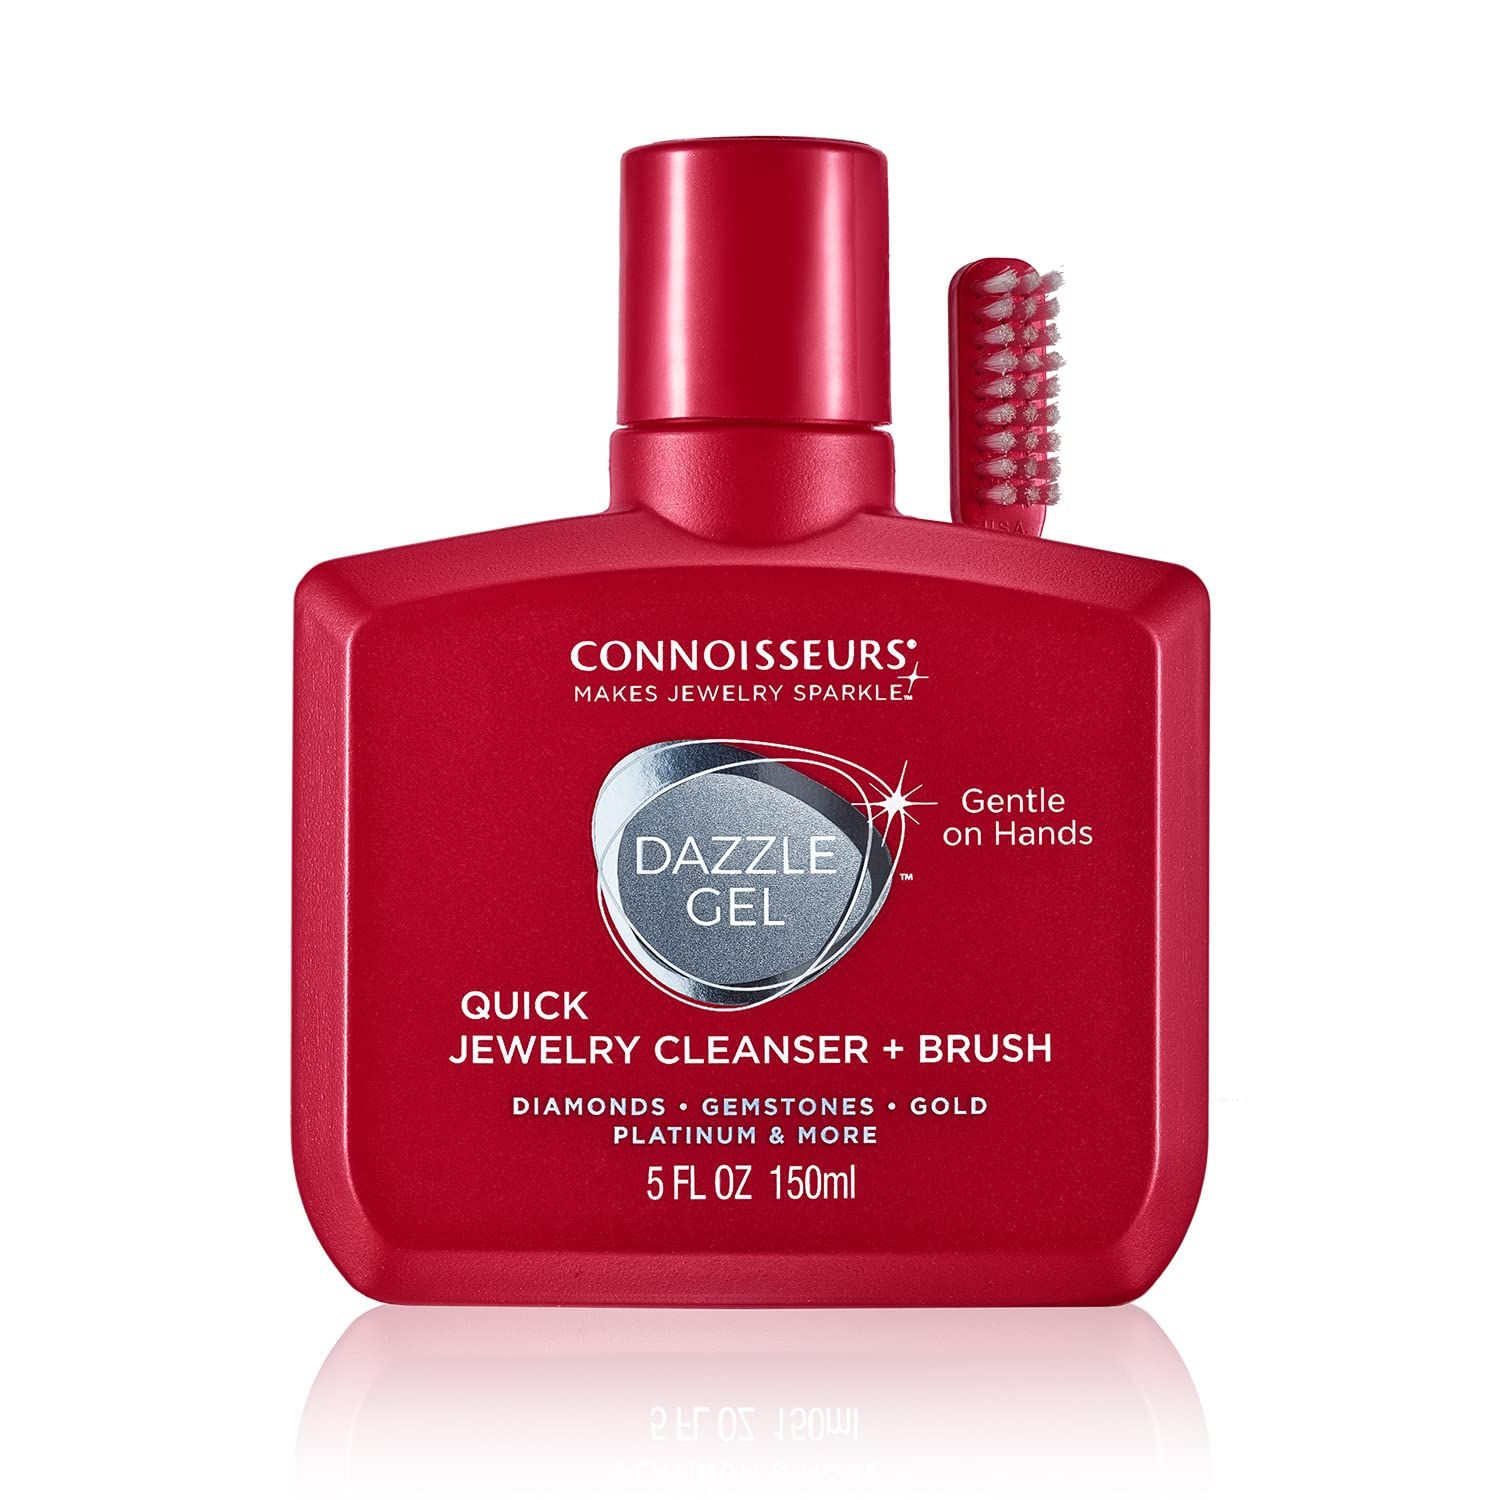 CONNOISSEURS Dazzle Quick Jewelry Cleansing Gel, 5 Ounce | Amazon (US)